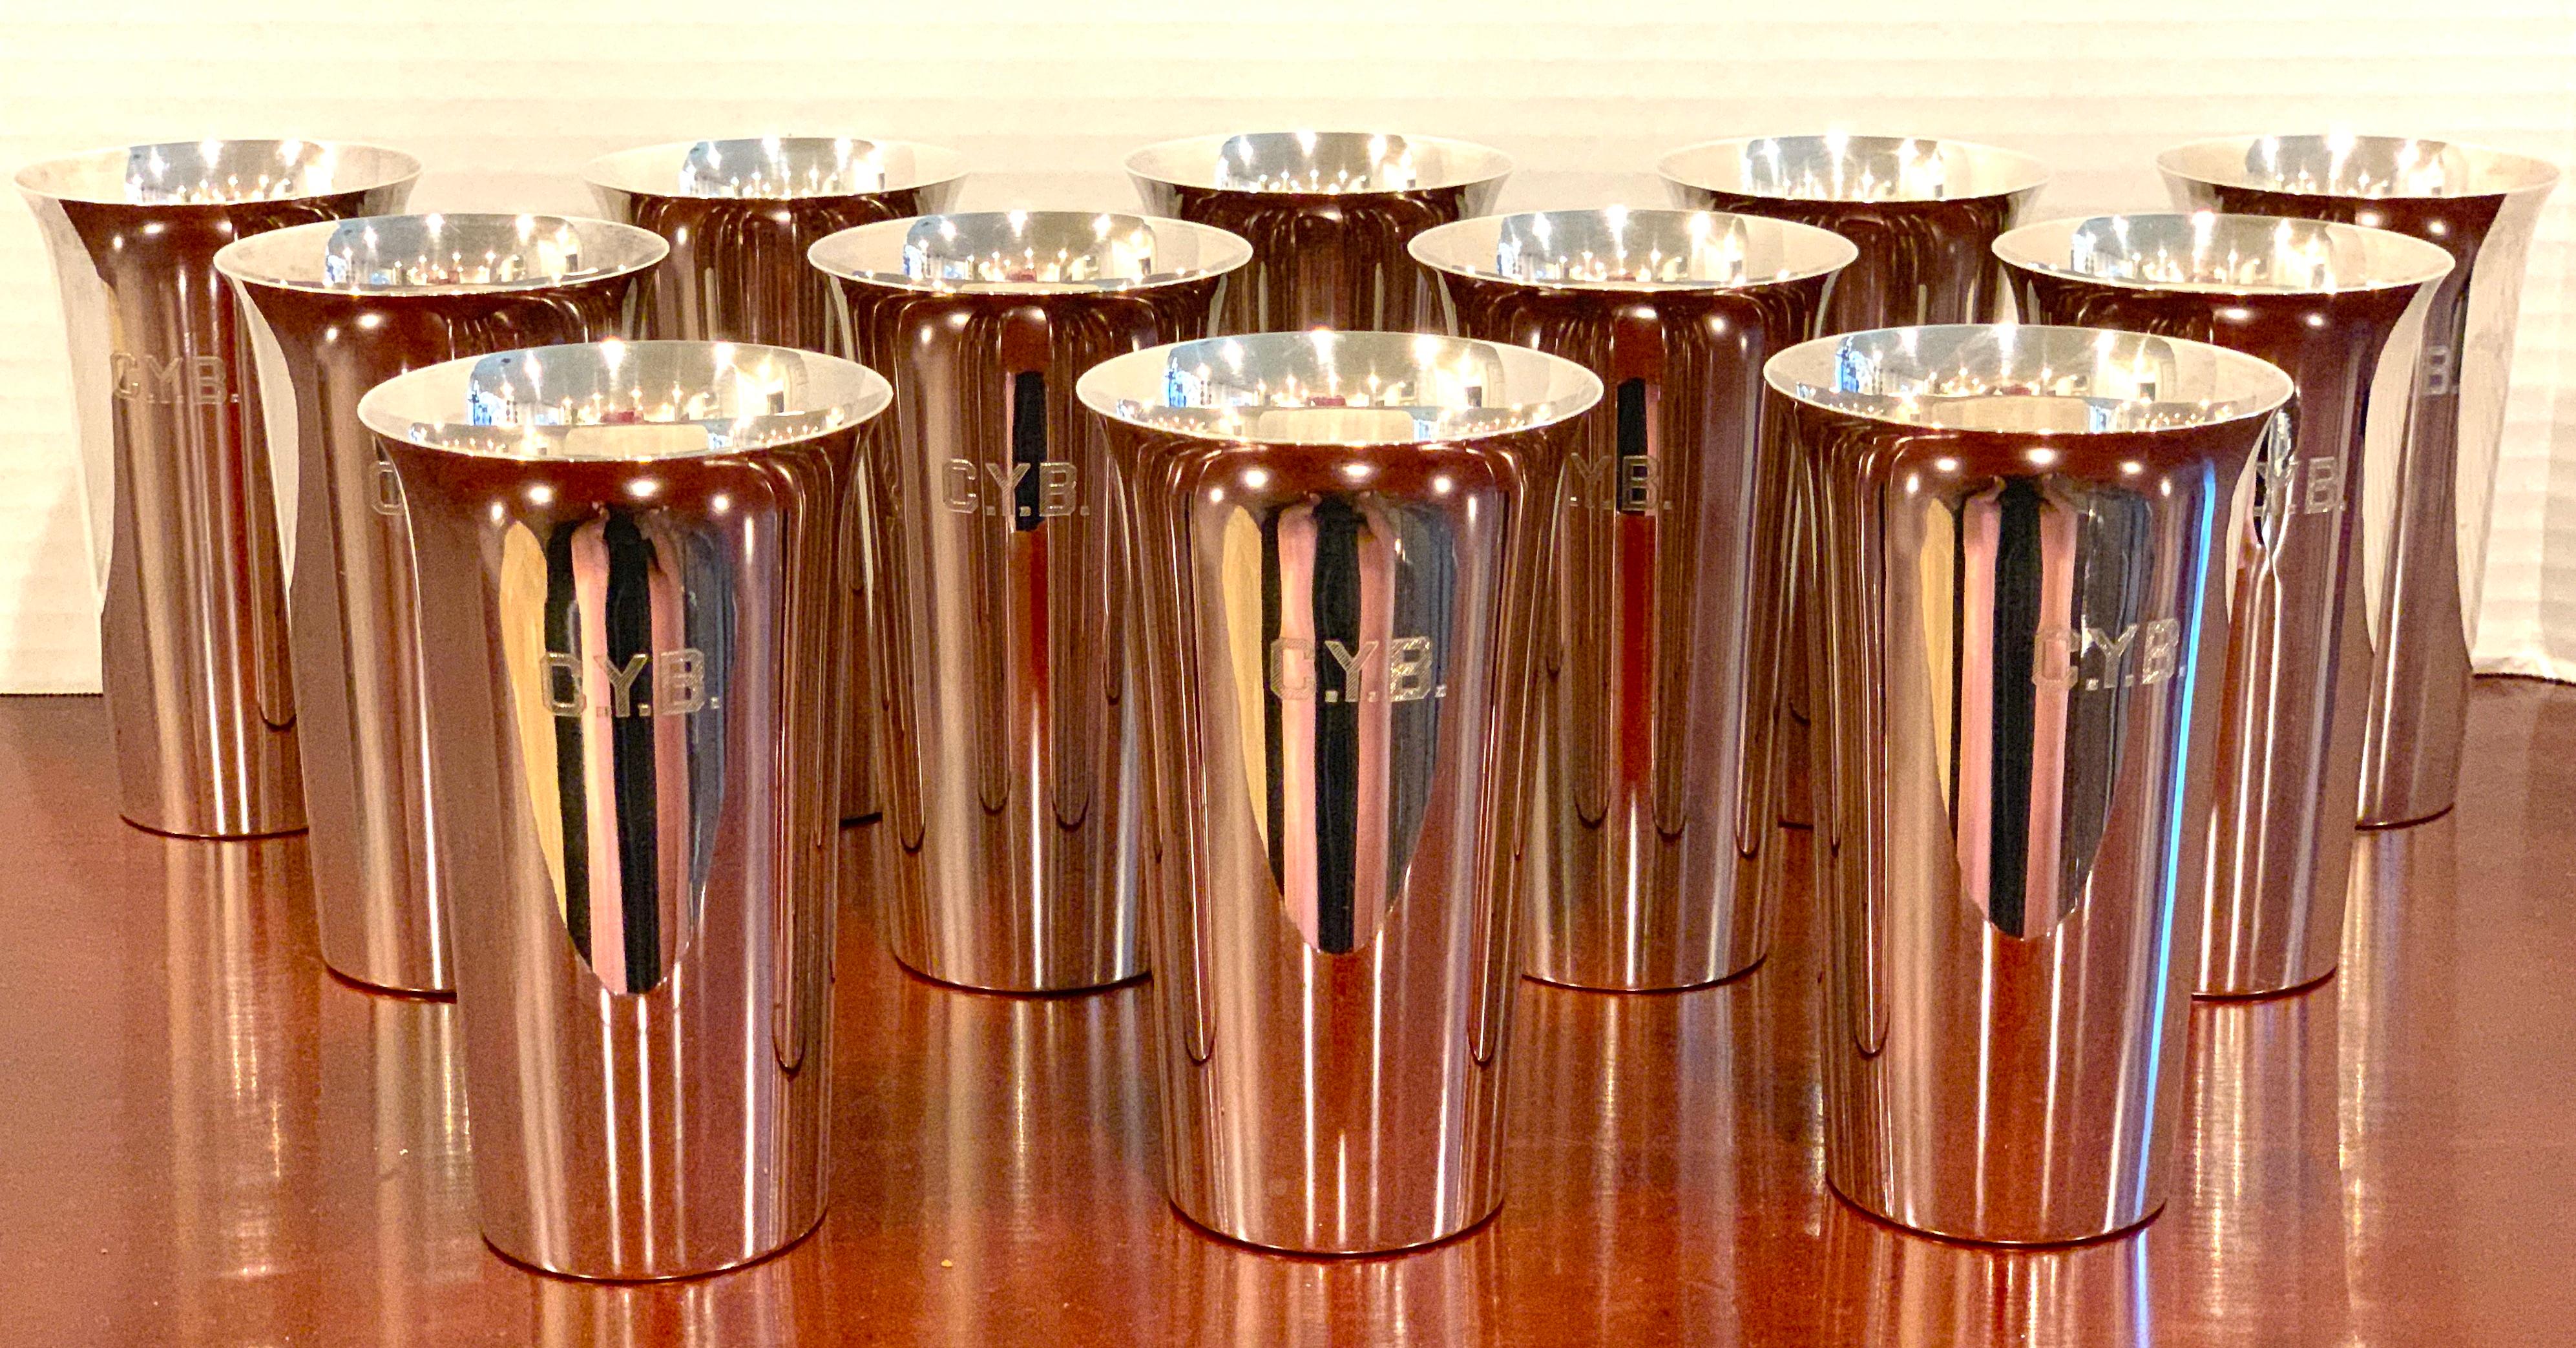 12 Italian Modern .950 Silver Mint Julep Cups, Each one tall and sleek bearing monogram of C.Y.B, Each one stamped 